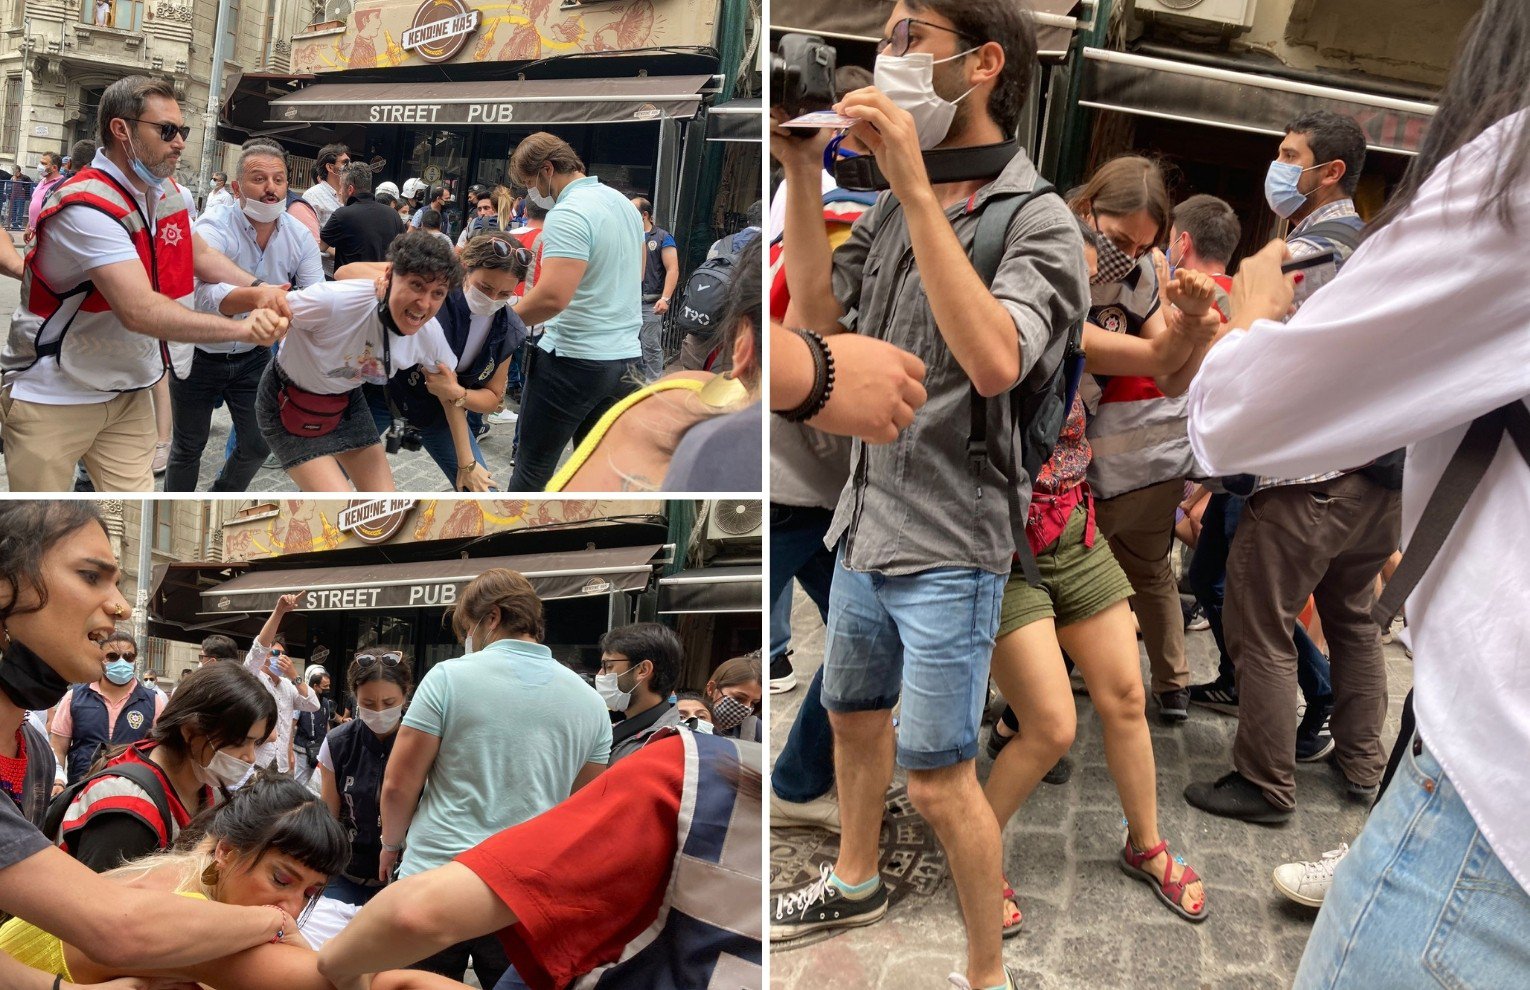 19th İstanbul Pride March: Police attack in Taksim, several people detained